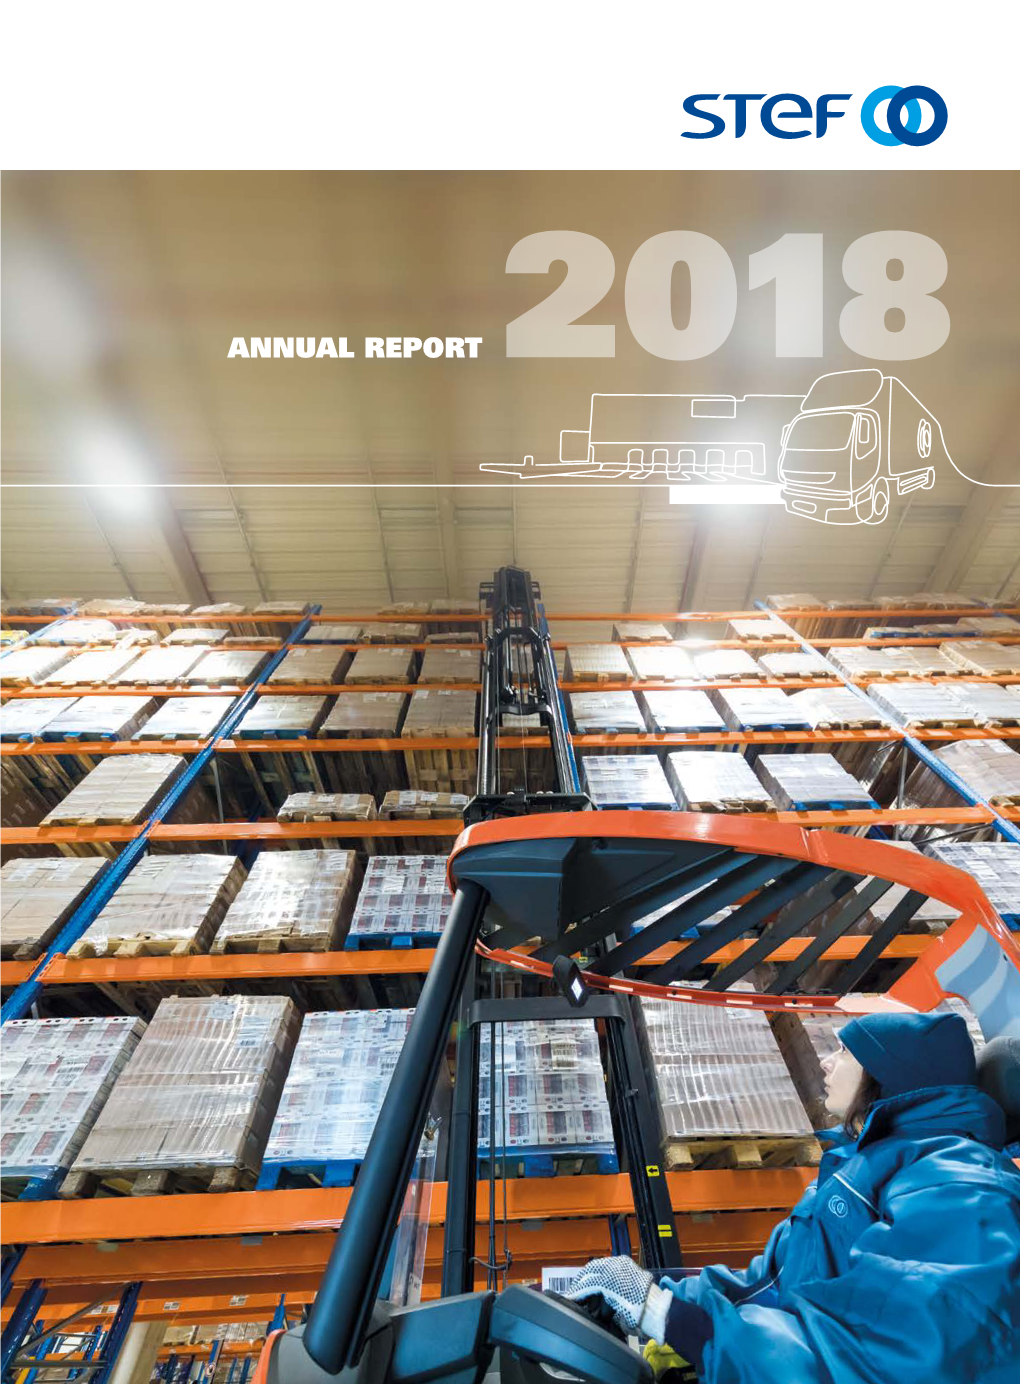 Annual Report 2018 Contents